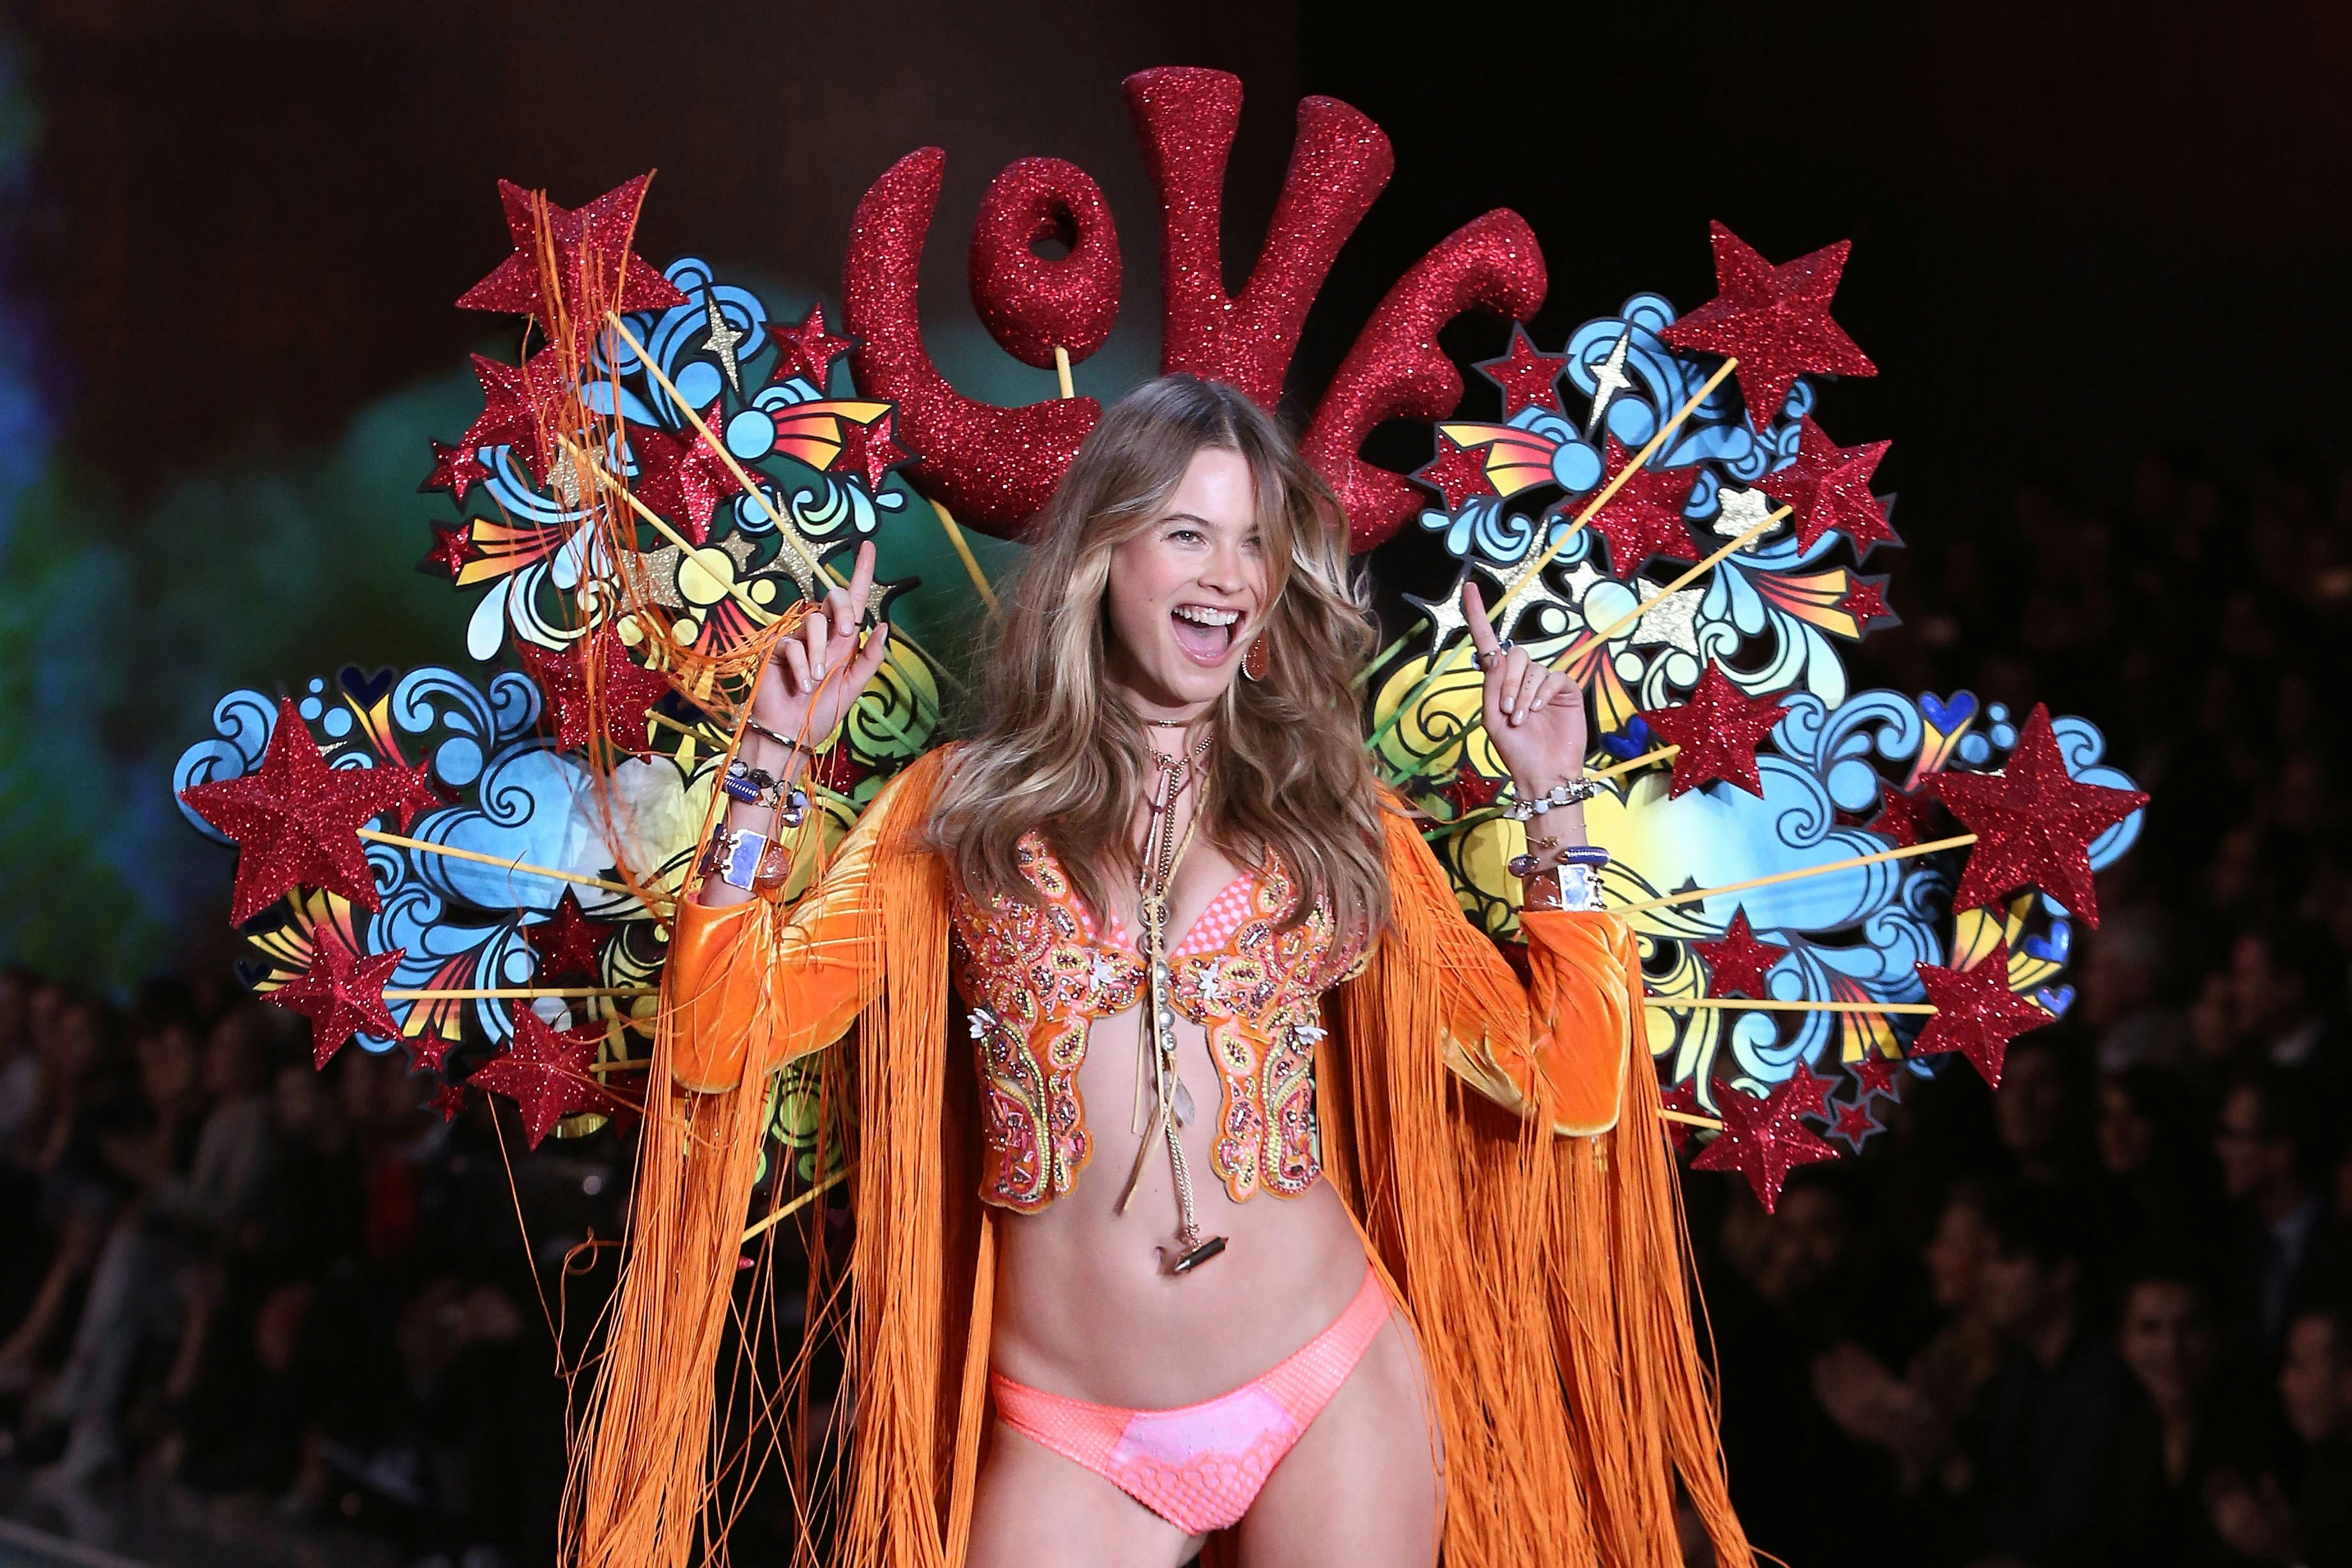 Victoria's Secret fashion show stars ditch their bras at after